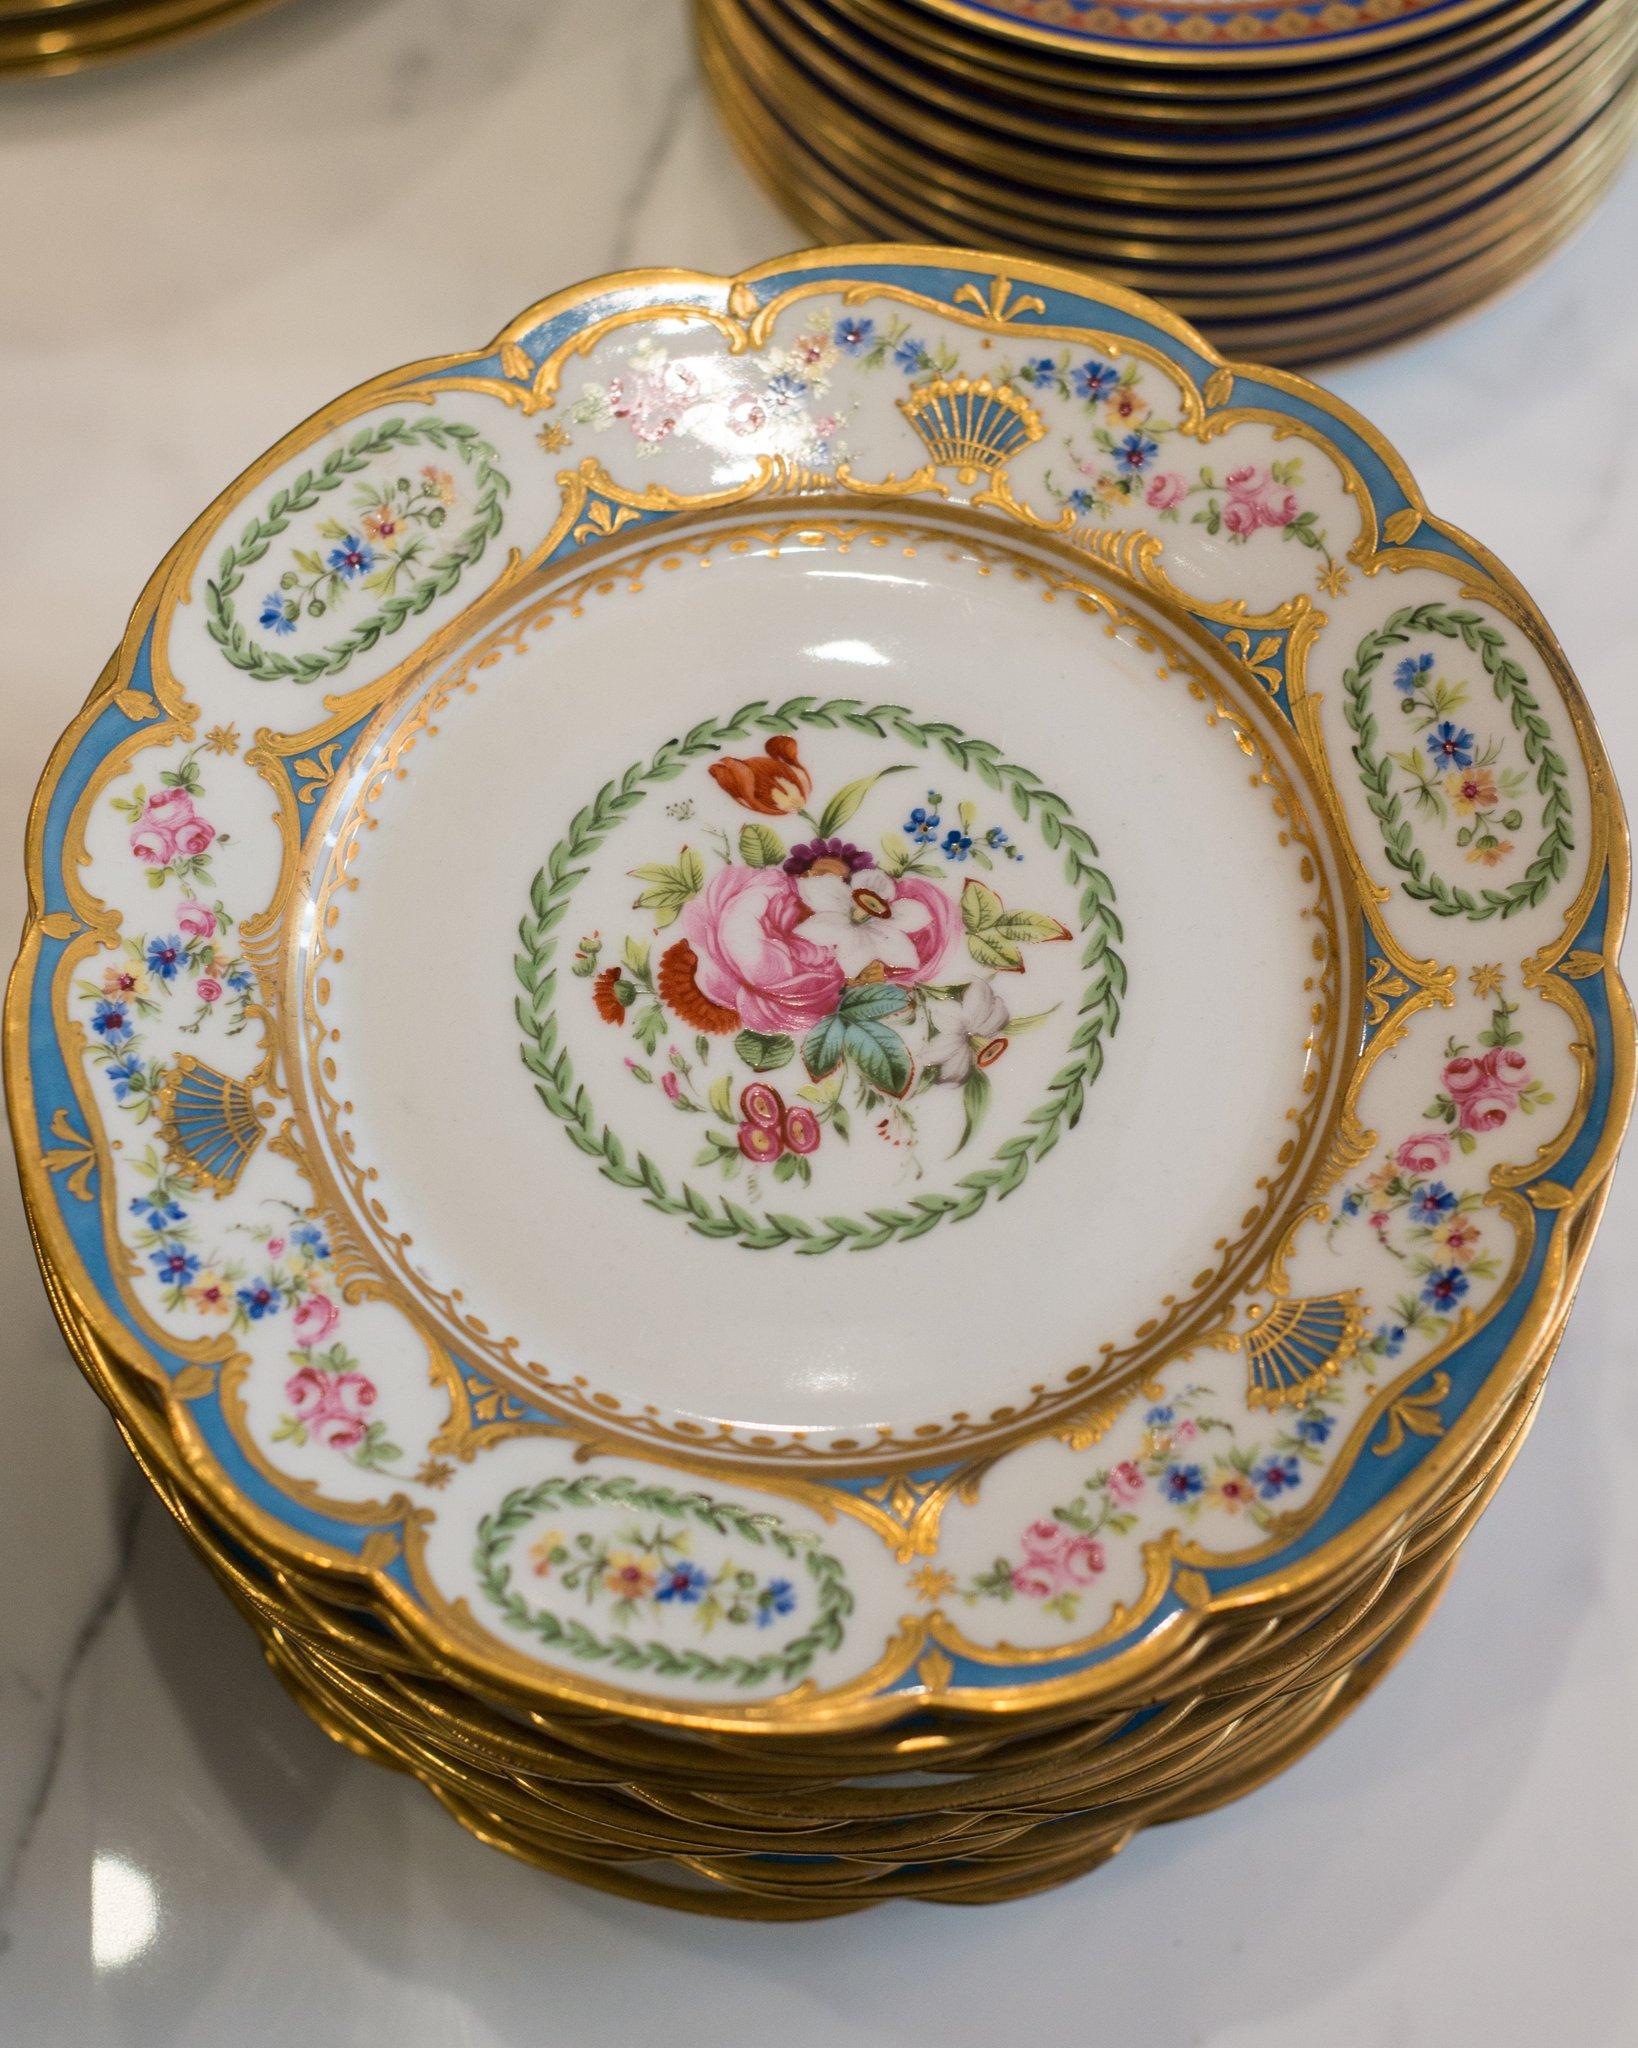 A set of 12 antique Porcelaine de Paris scalloped plates, hand printed with flowers and ornately gilded in gold.